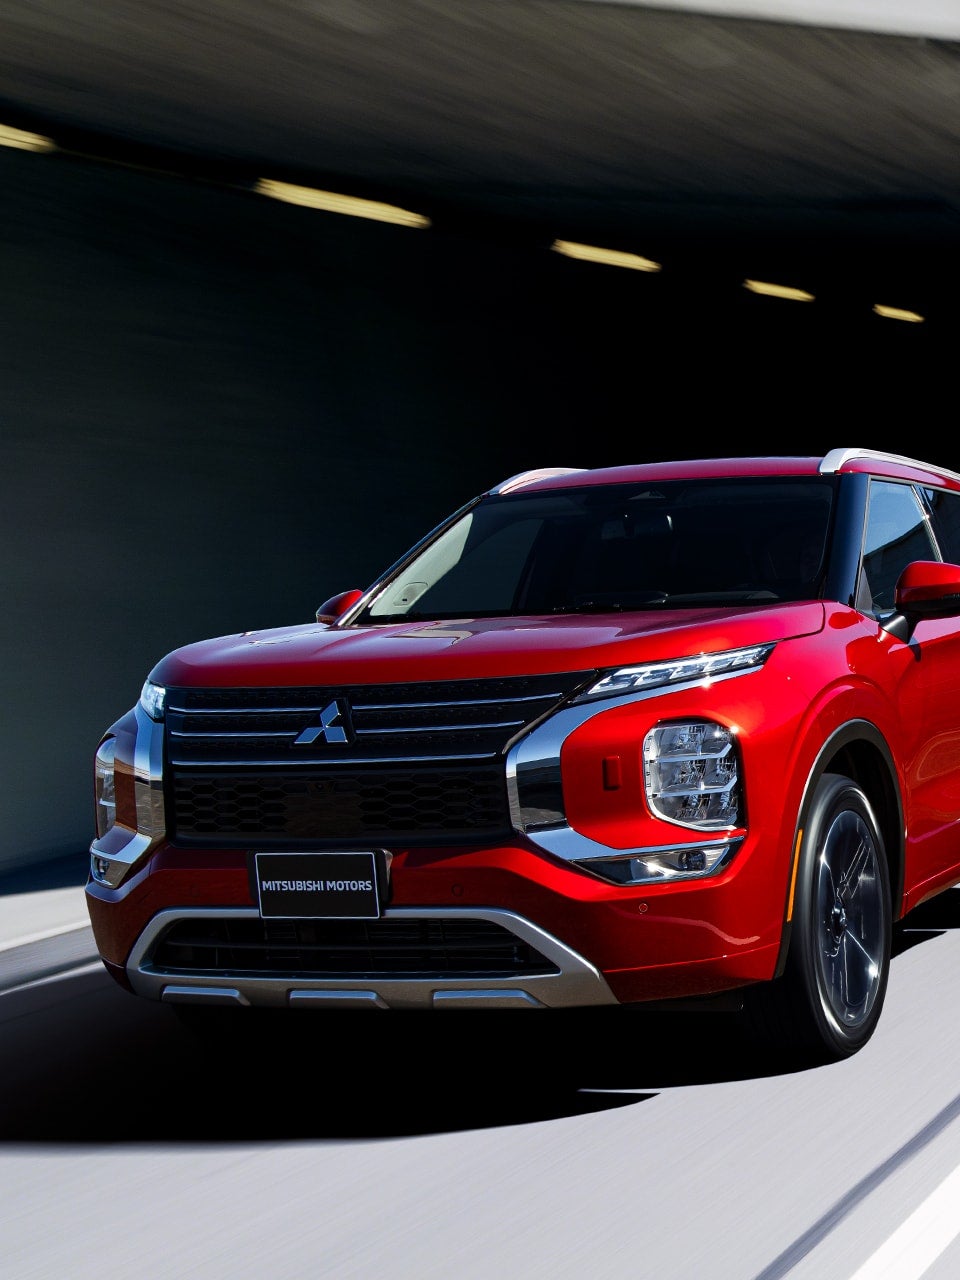 https://www.mitsubishicars.com/content/dam/mitsubishi-motors-us/images/siteimages/cars/outlander/my24/performance/2024-mitsubishi-outlander-suv-red-black-side-by-side-m.jpg